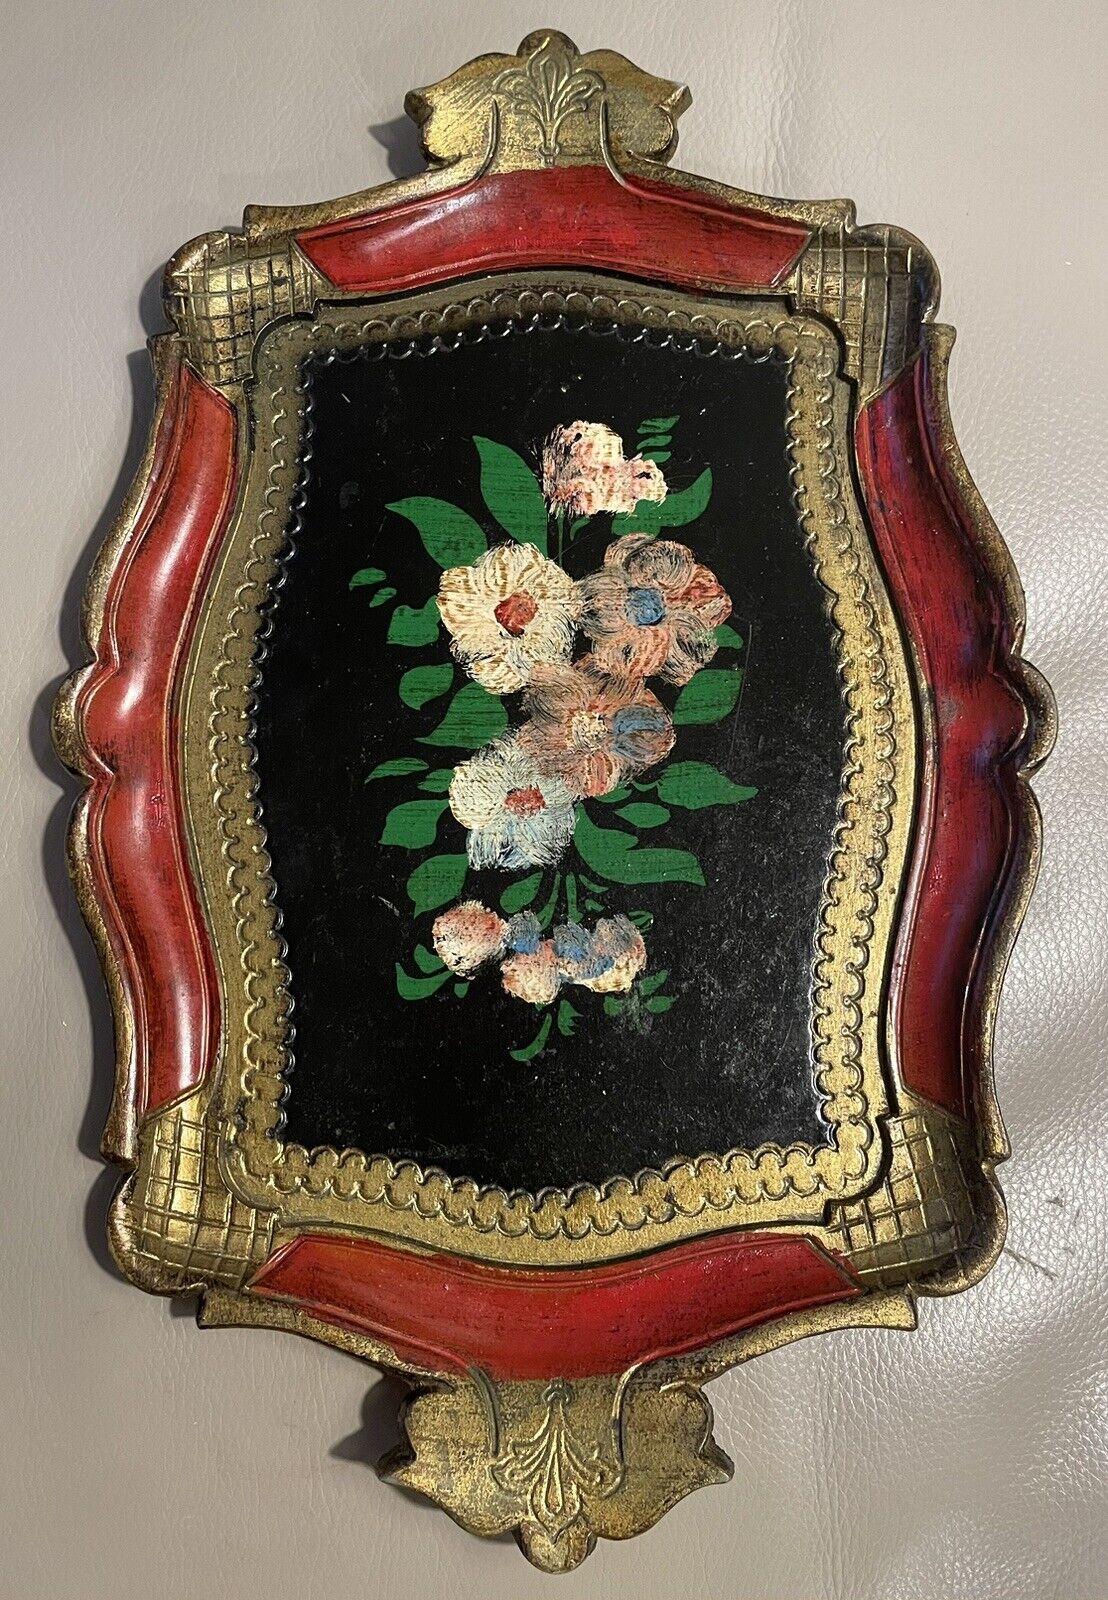 Vintage Italian Gold Tone Tray with Floral Still Life Art in Center 13.5x9 inch